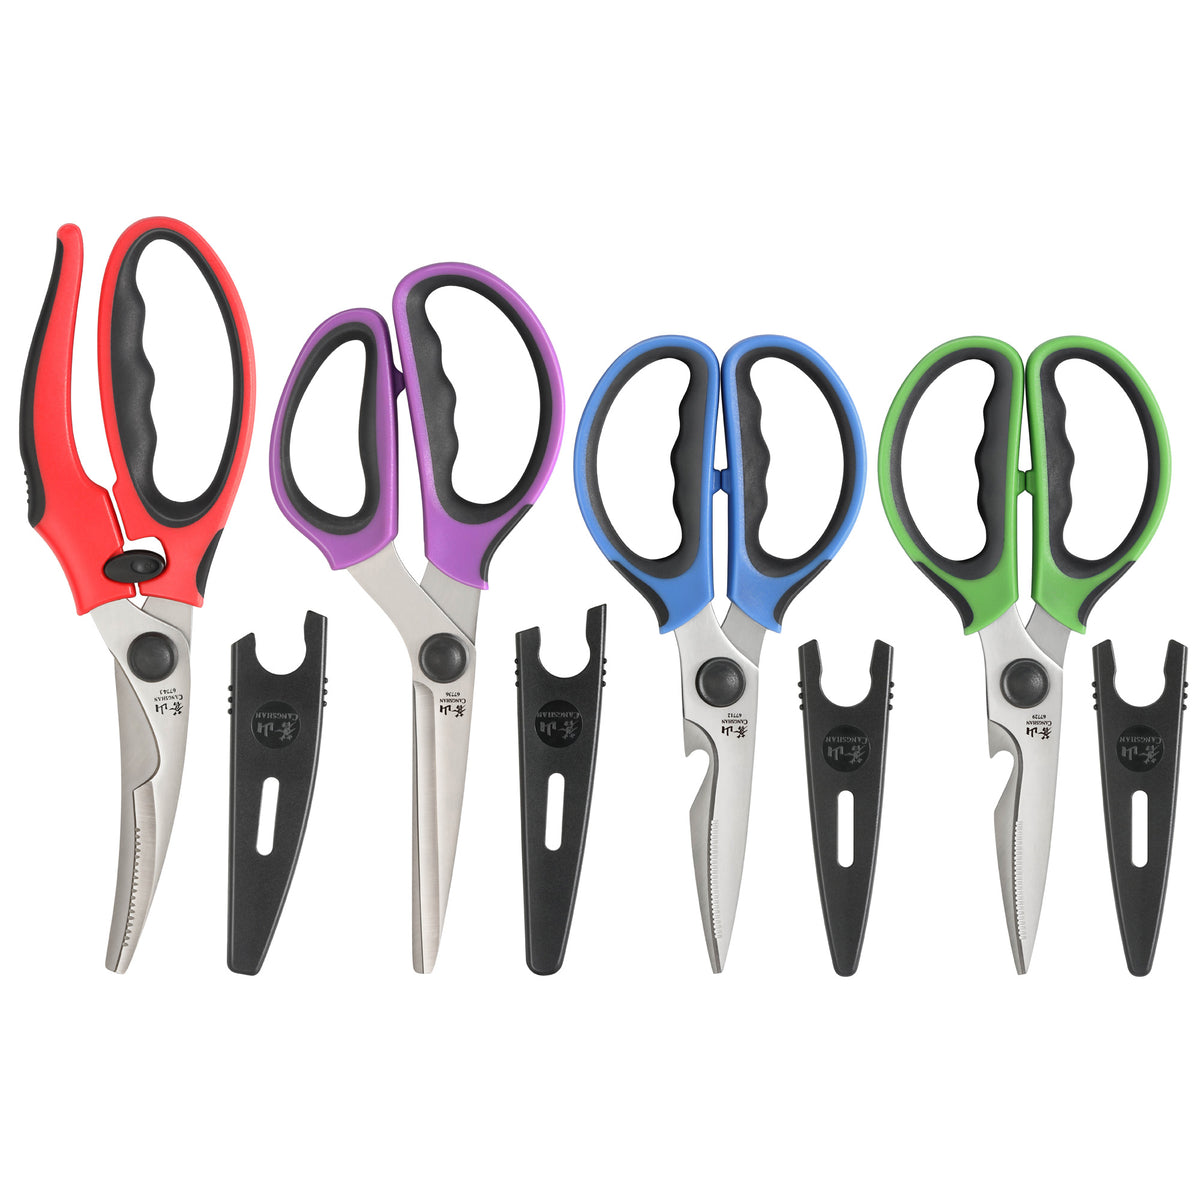 Cangshan 4-Piece Heavy Duty Shears Set with Guards · Multi-Color